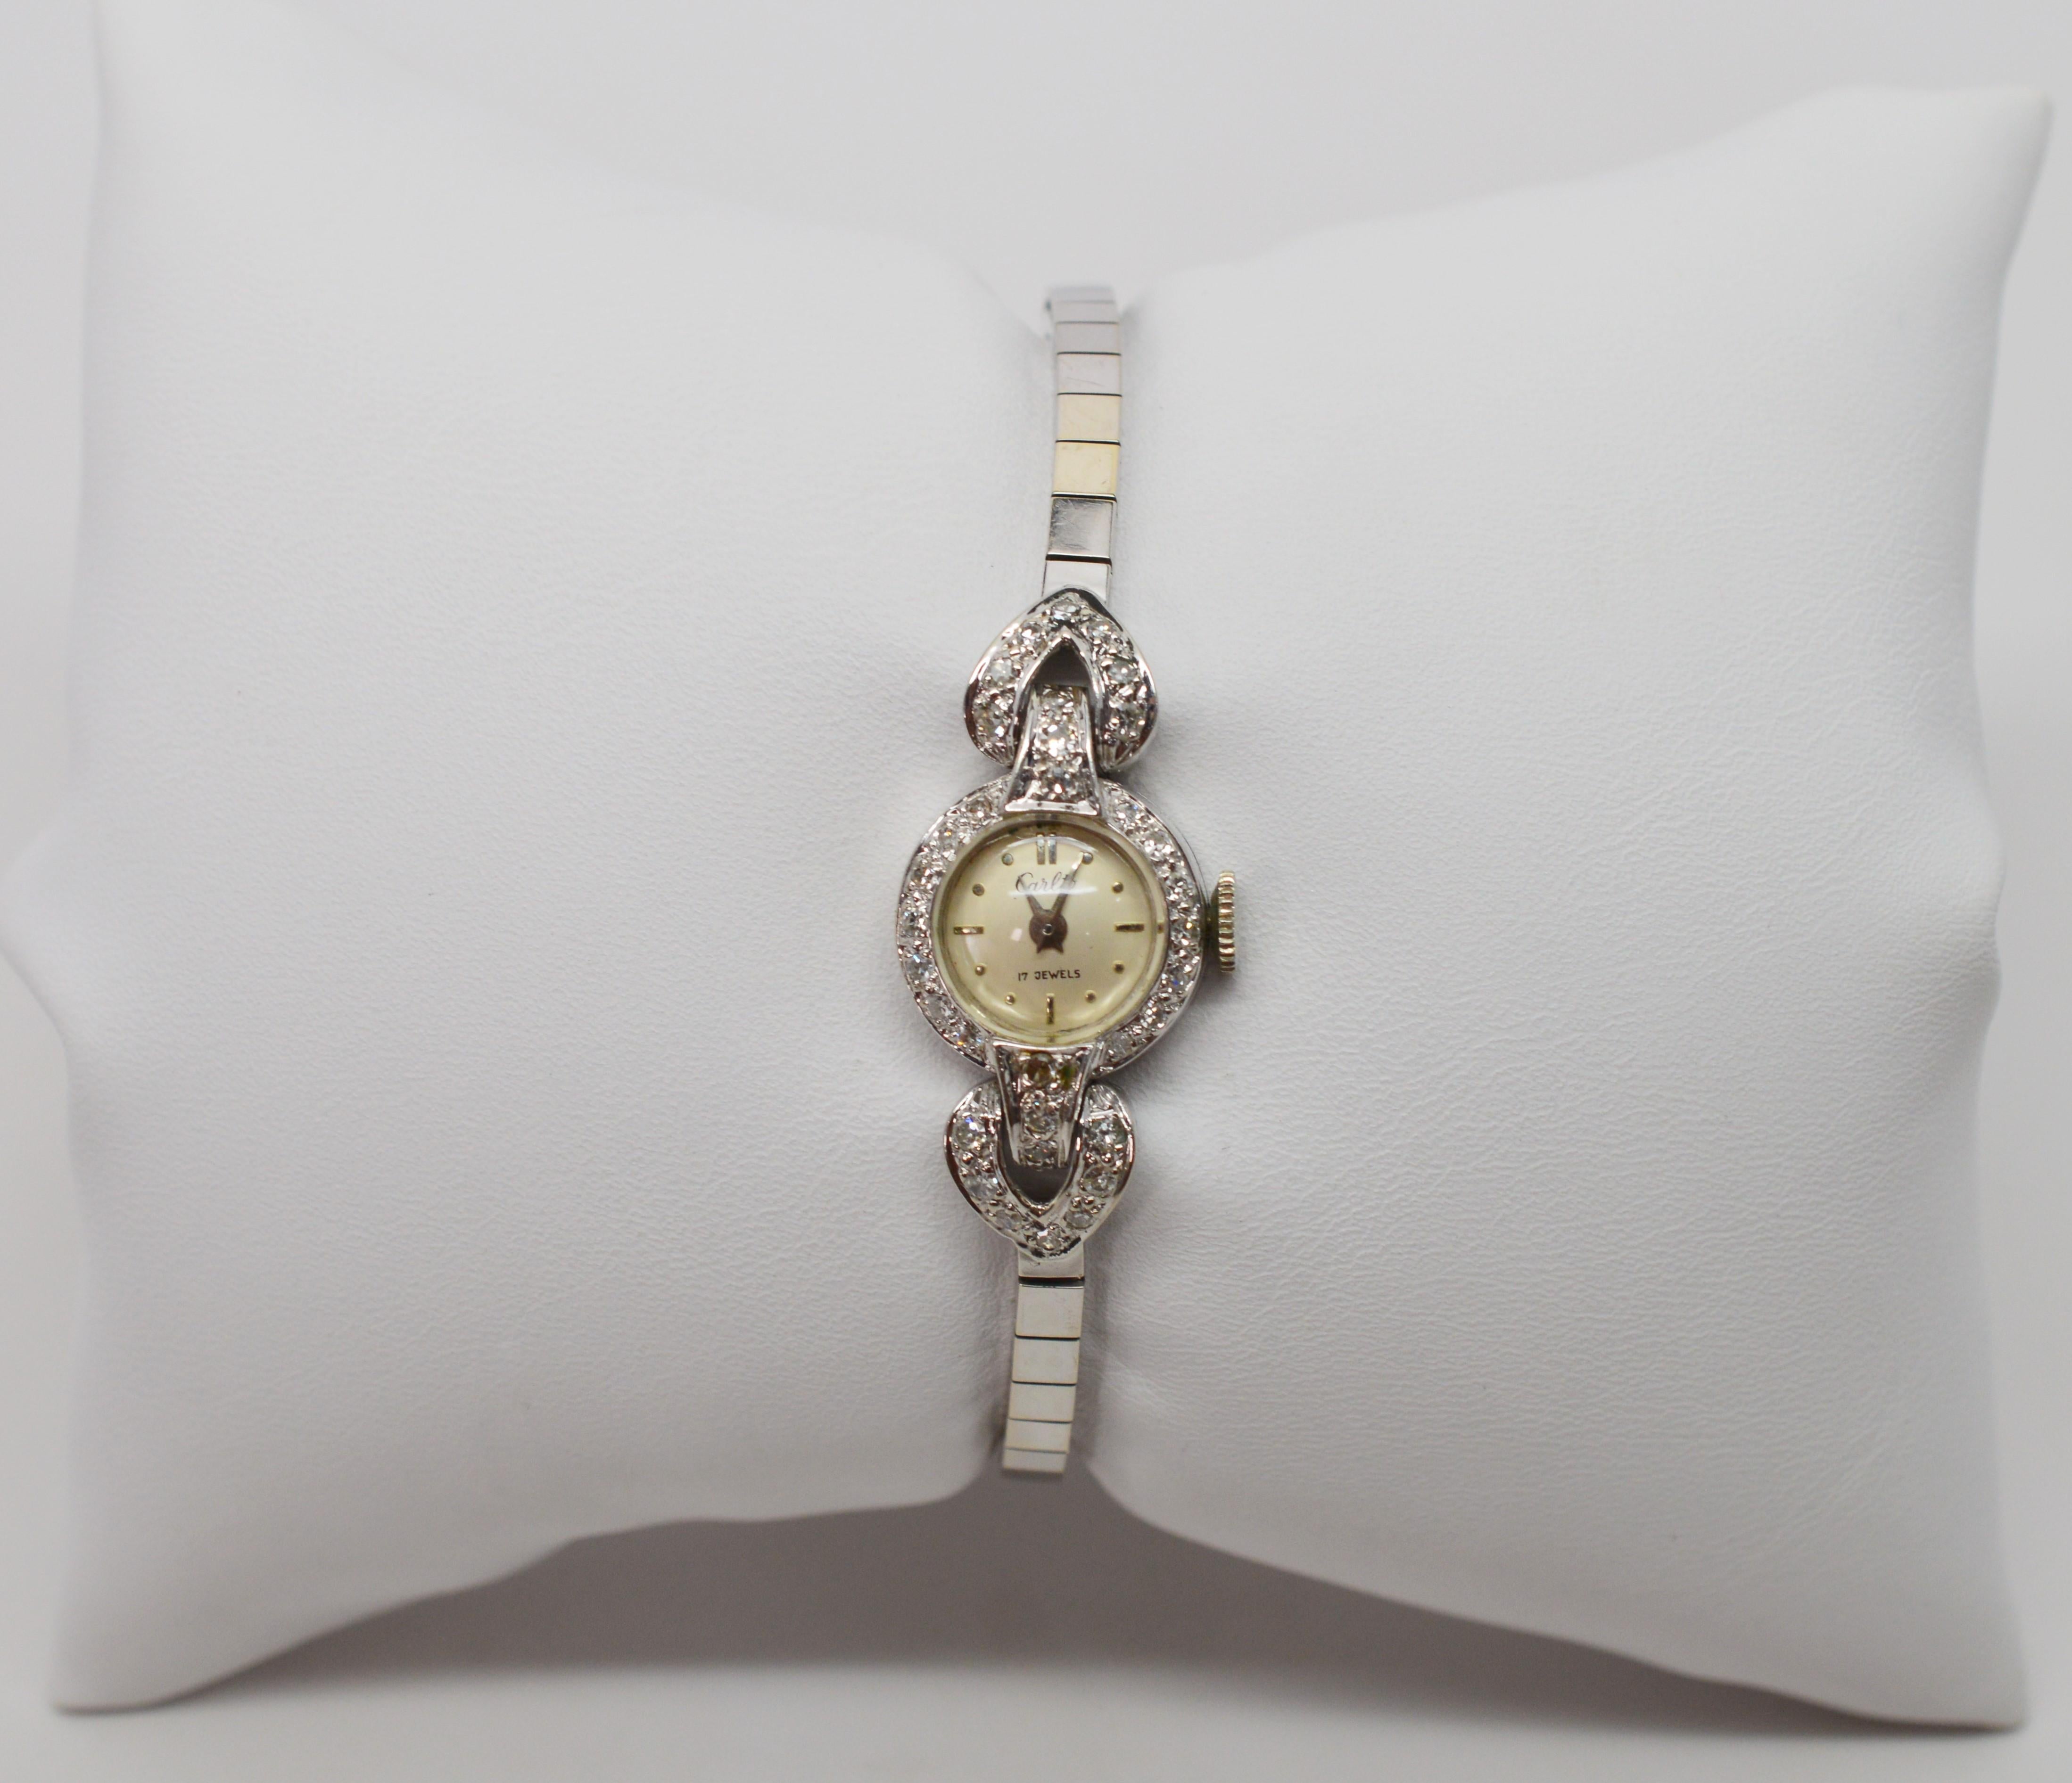 Fine and feminine in fourteen carat white gold, this women's diamond enhanced antique bracelet watch by Carloto is exquisite. 
Thirty six H/I1 diamonds, totaling one third carat total weight adorned it's petite round face and heart-shaped side